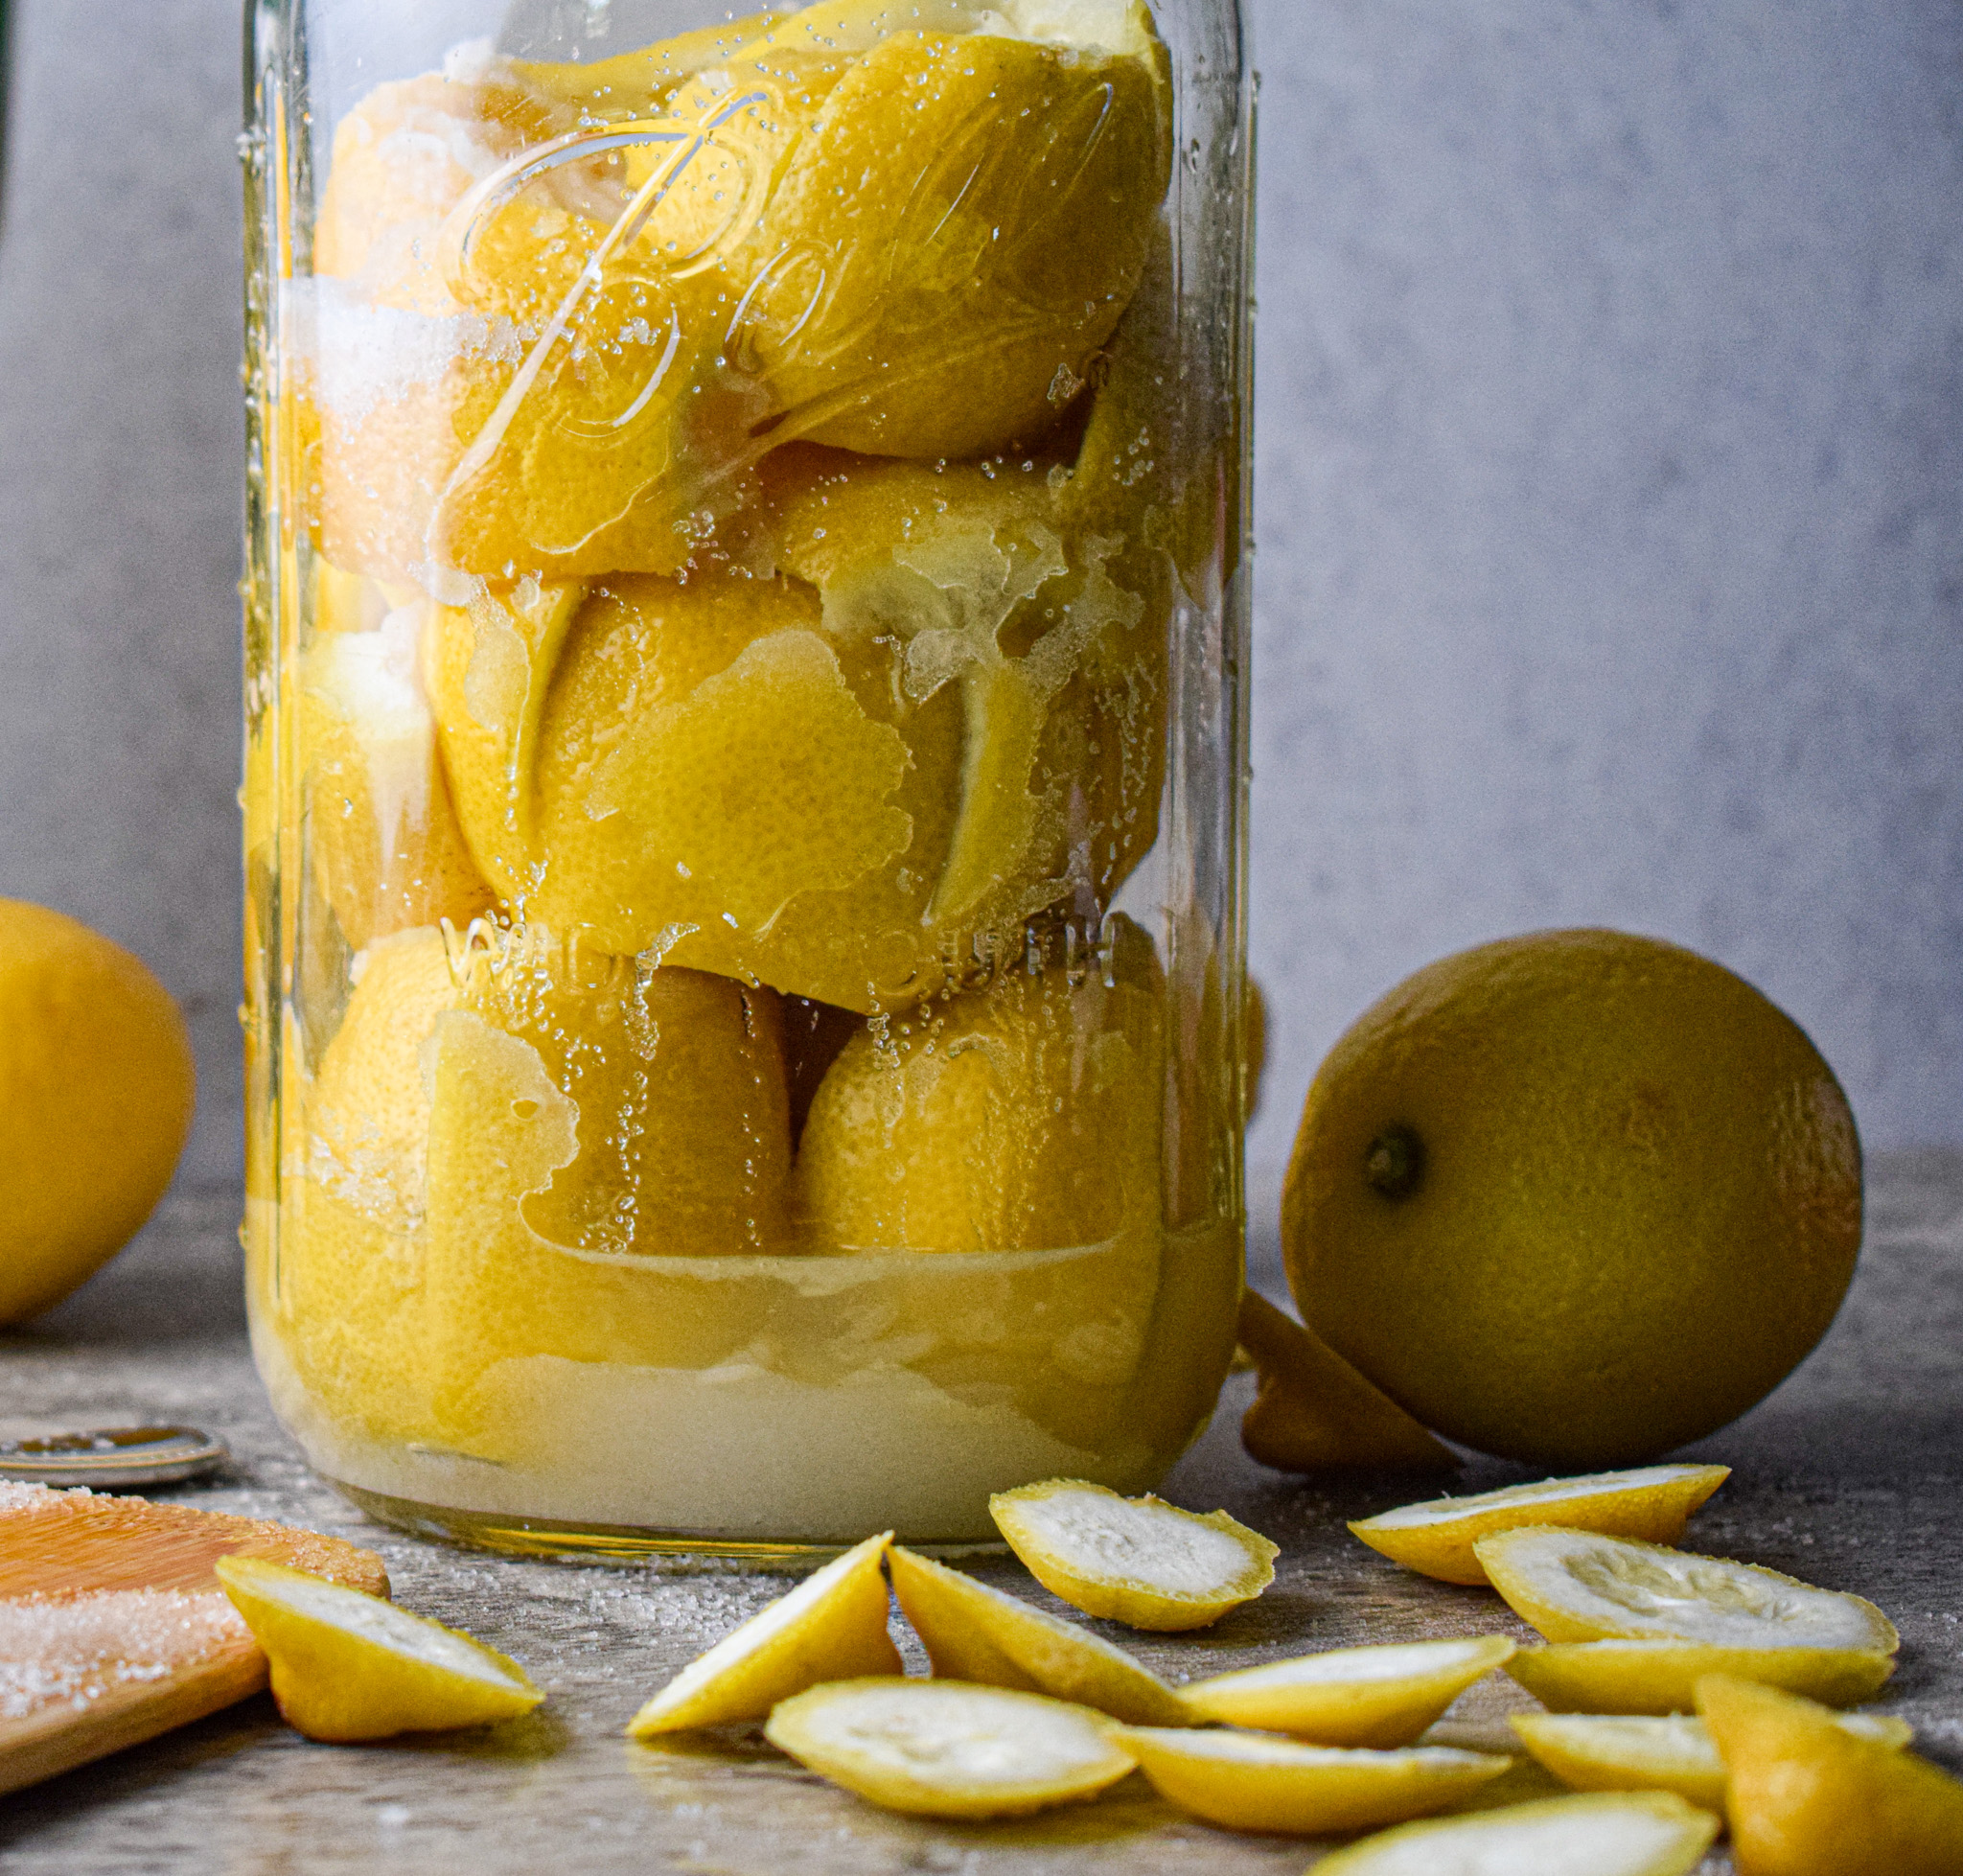 layer the lemons in a large glass jar